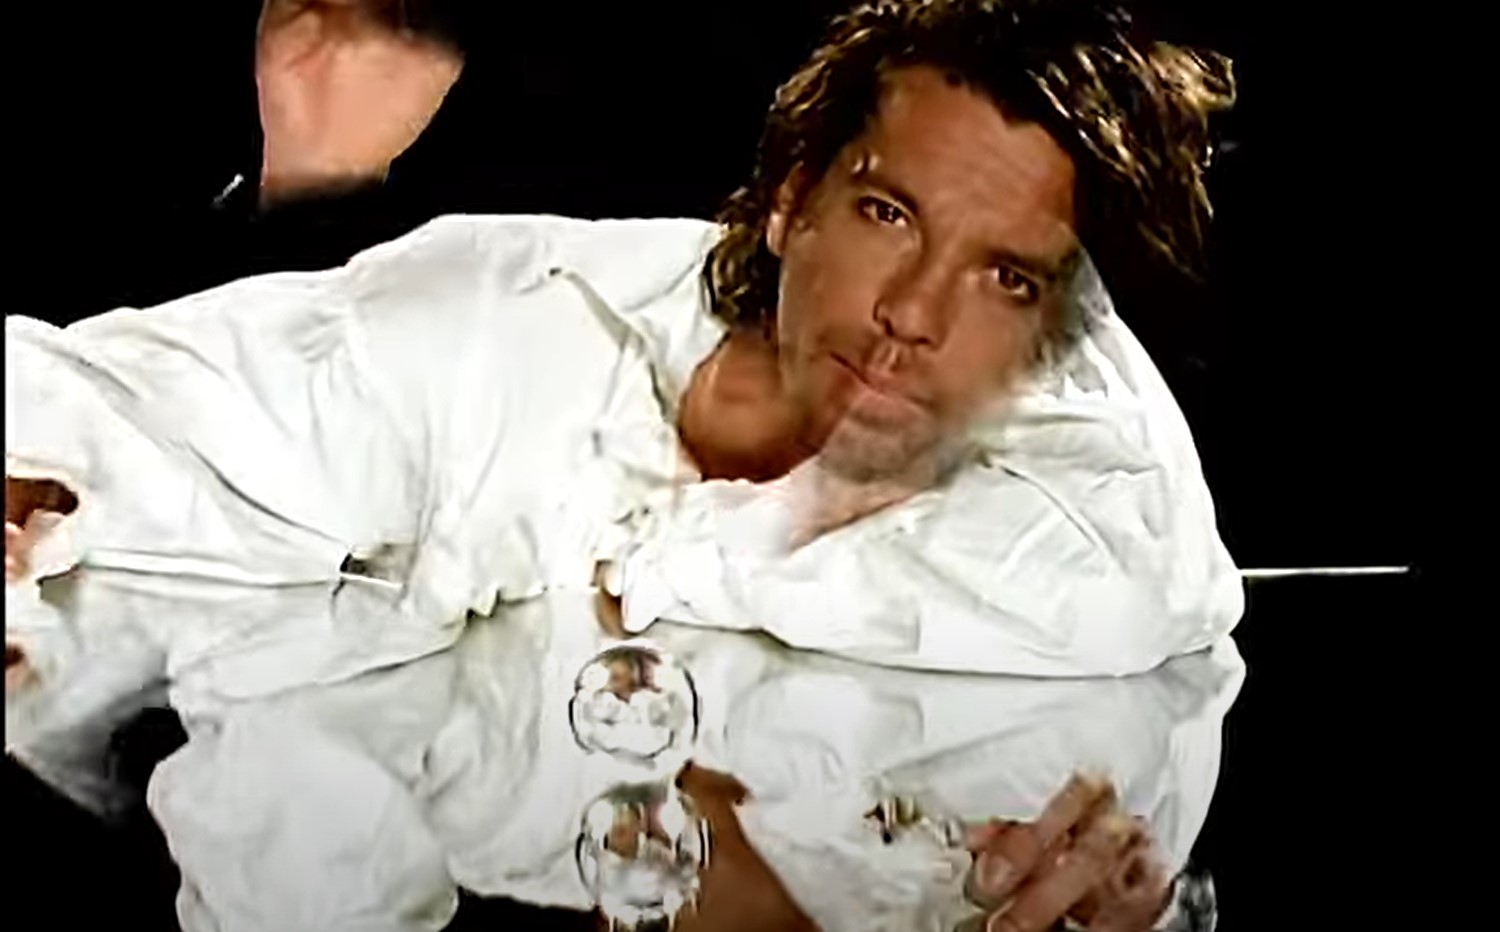 INXS Release Remastered HD Version Of "Not Enough Time" Video